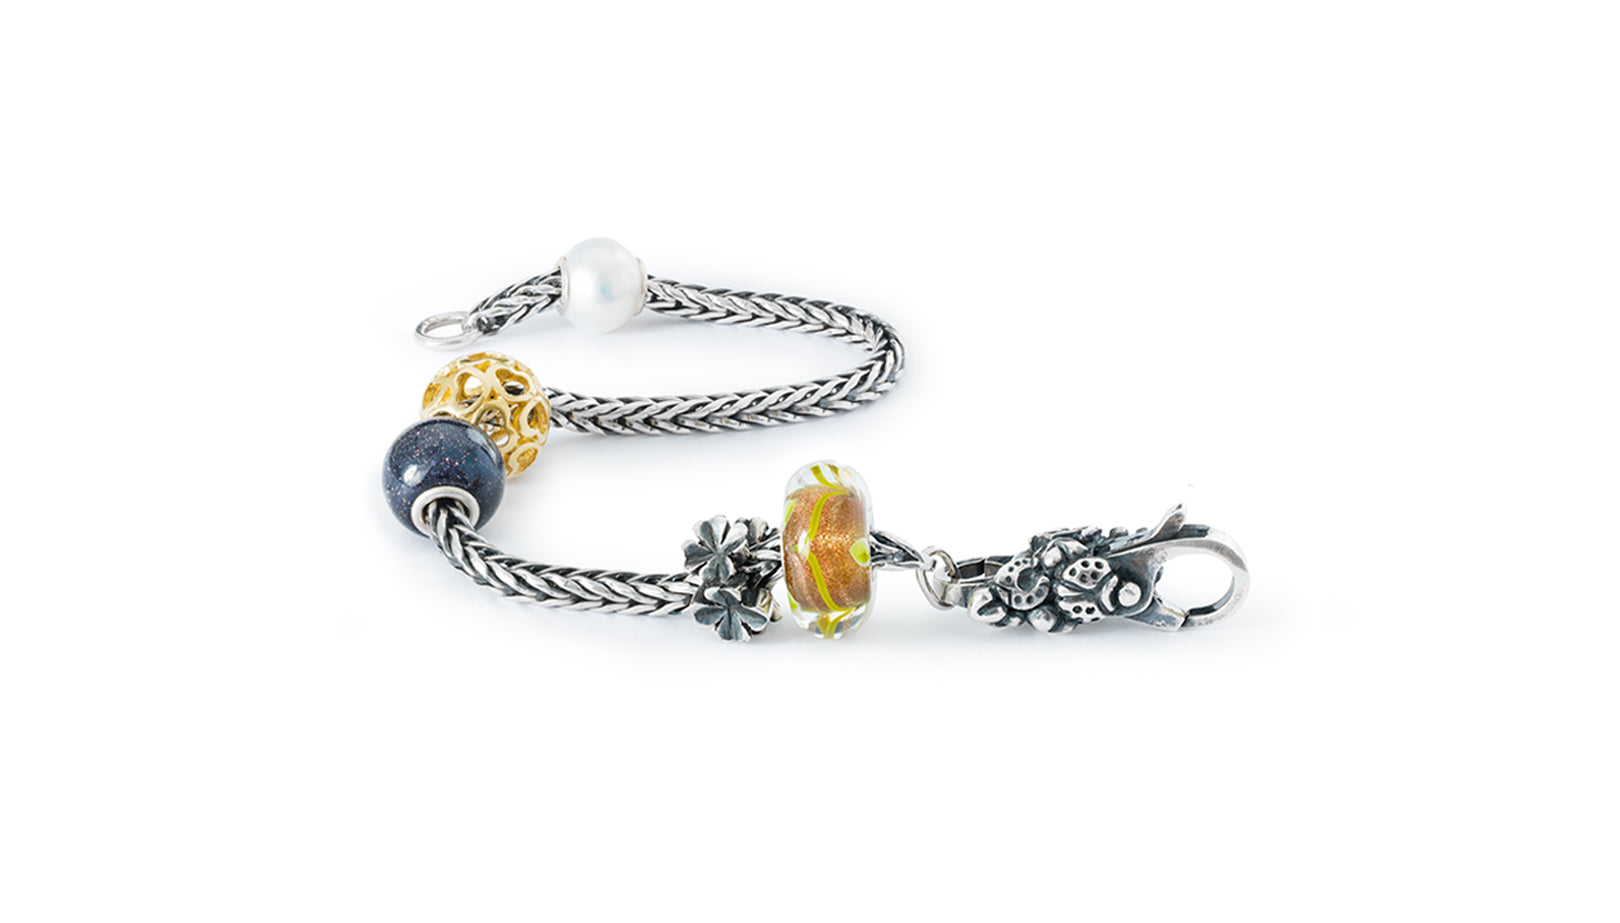 Fortune keepers bracelet with extra beads